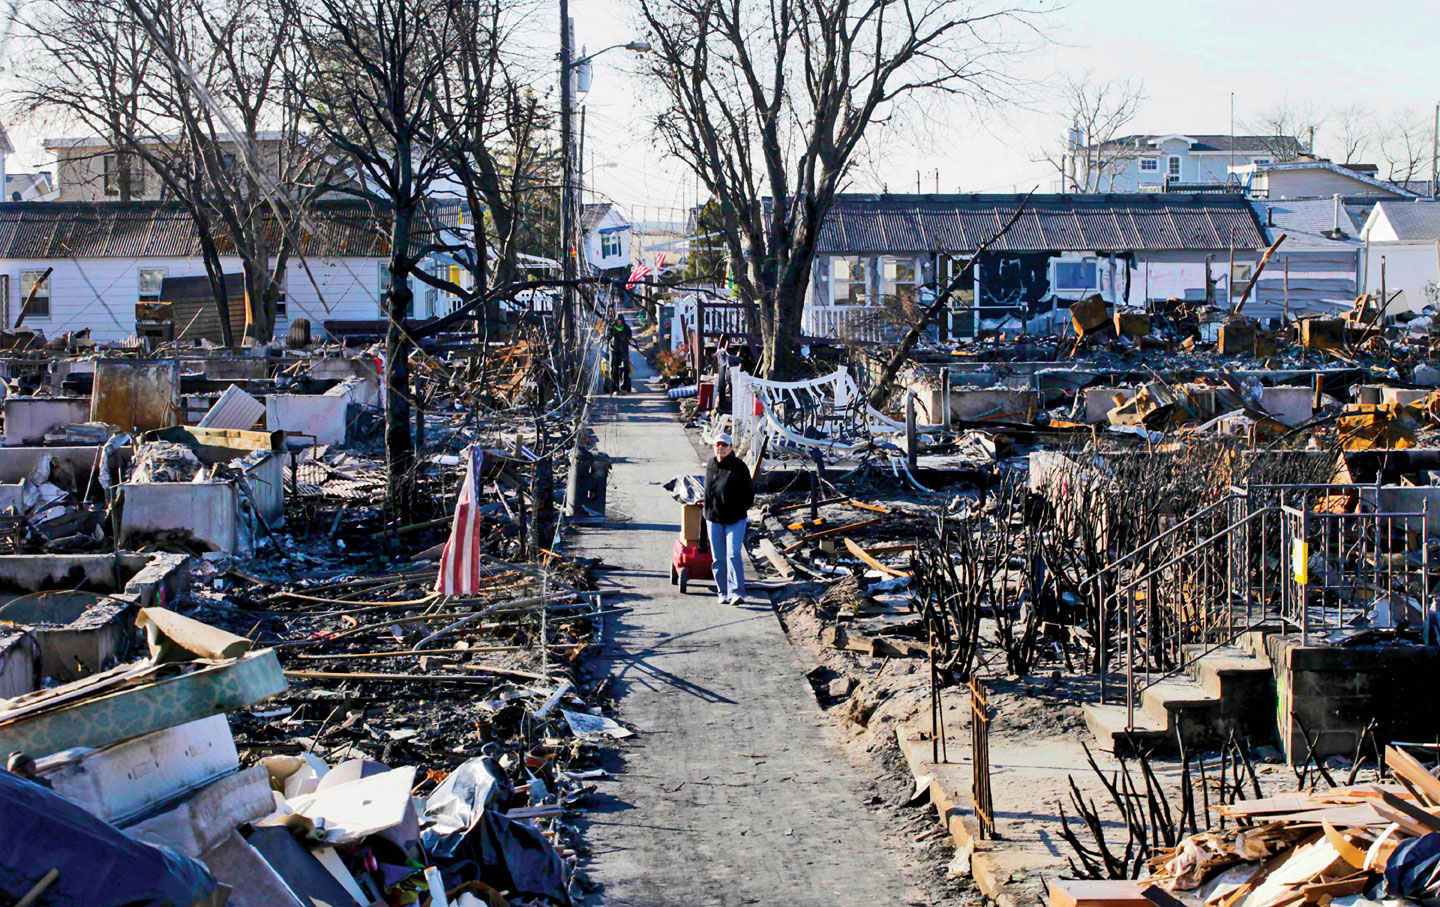 The wreckage: A street in Breezy Point, a section of the Rockaways, two weeks after Sandy.